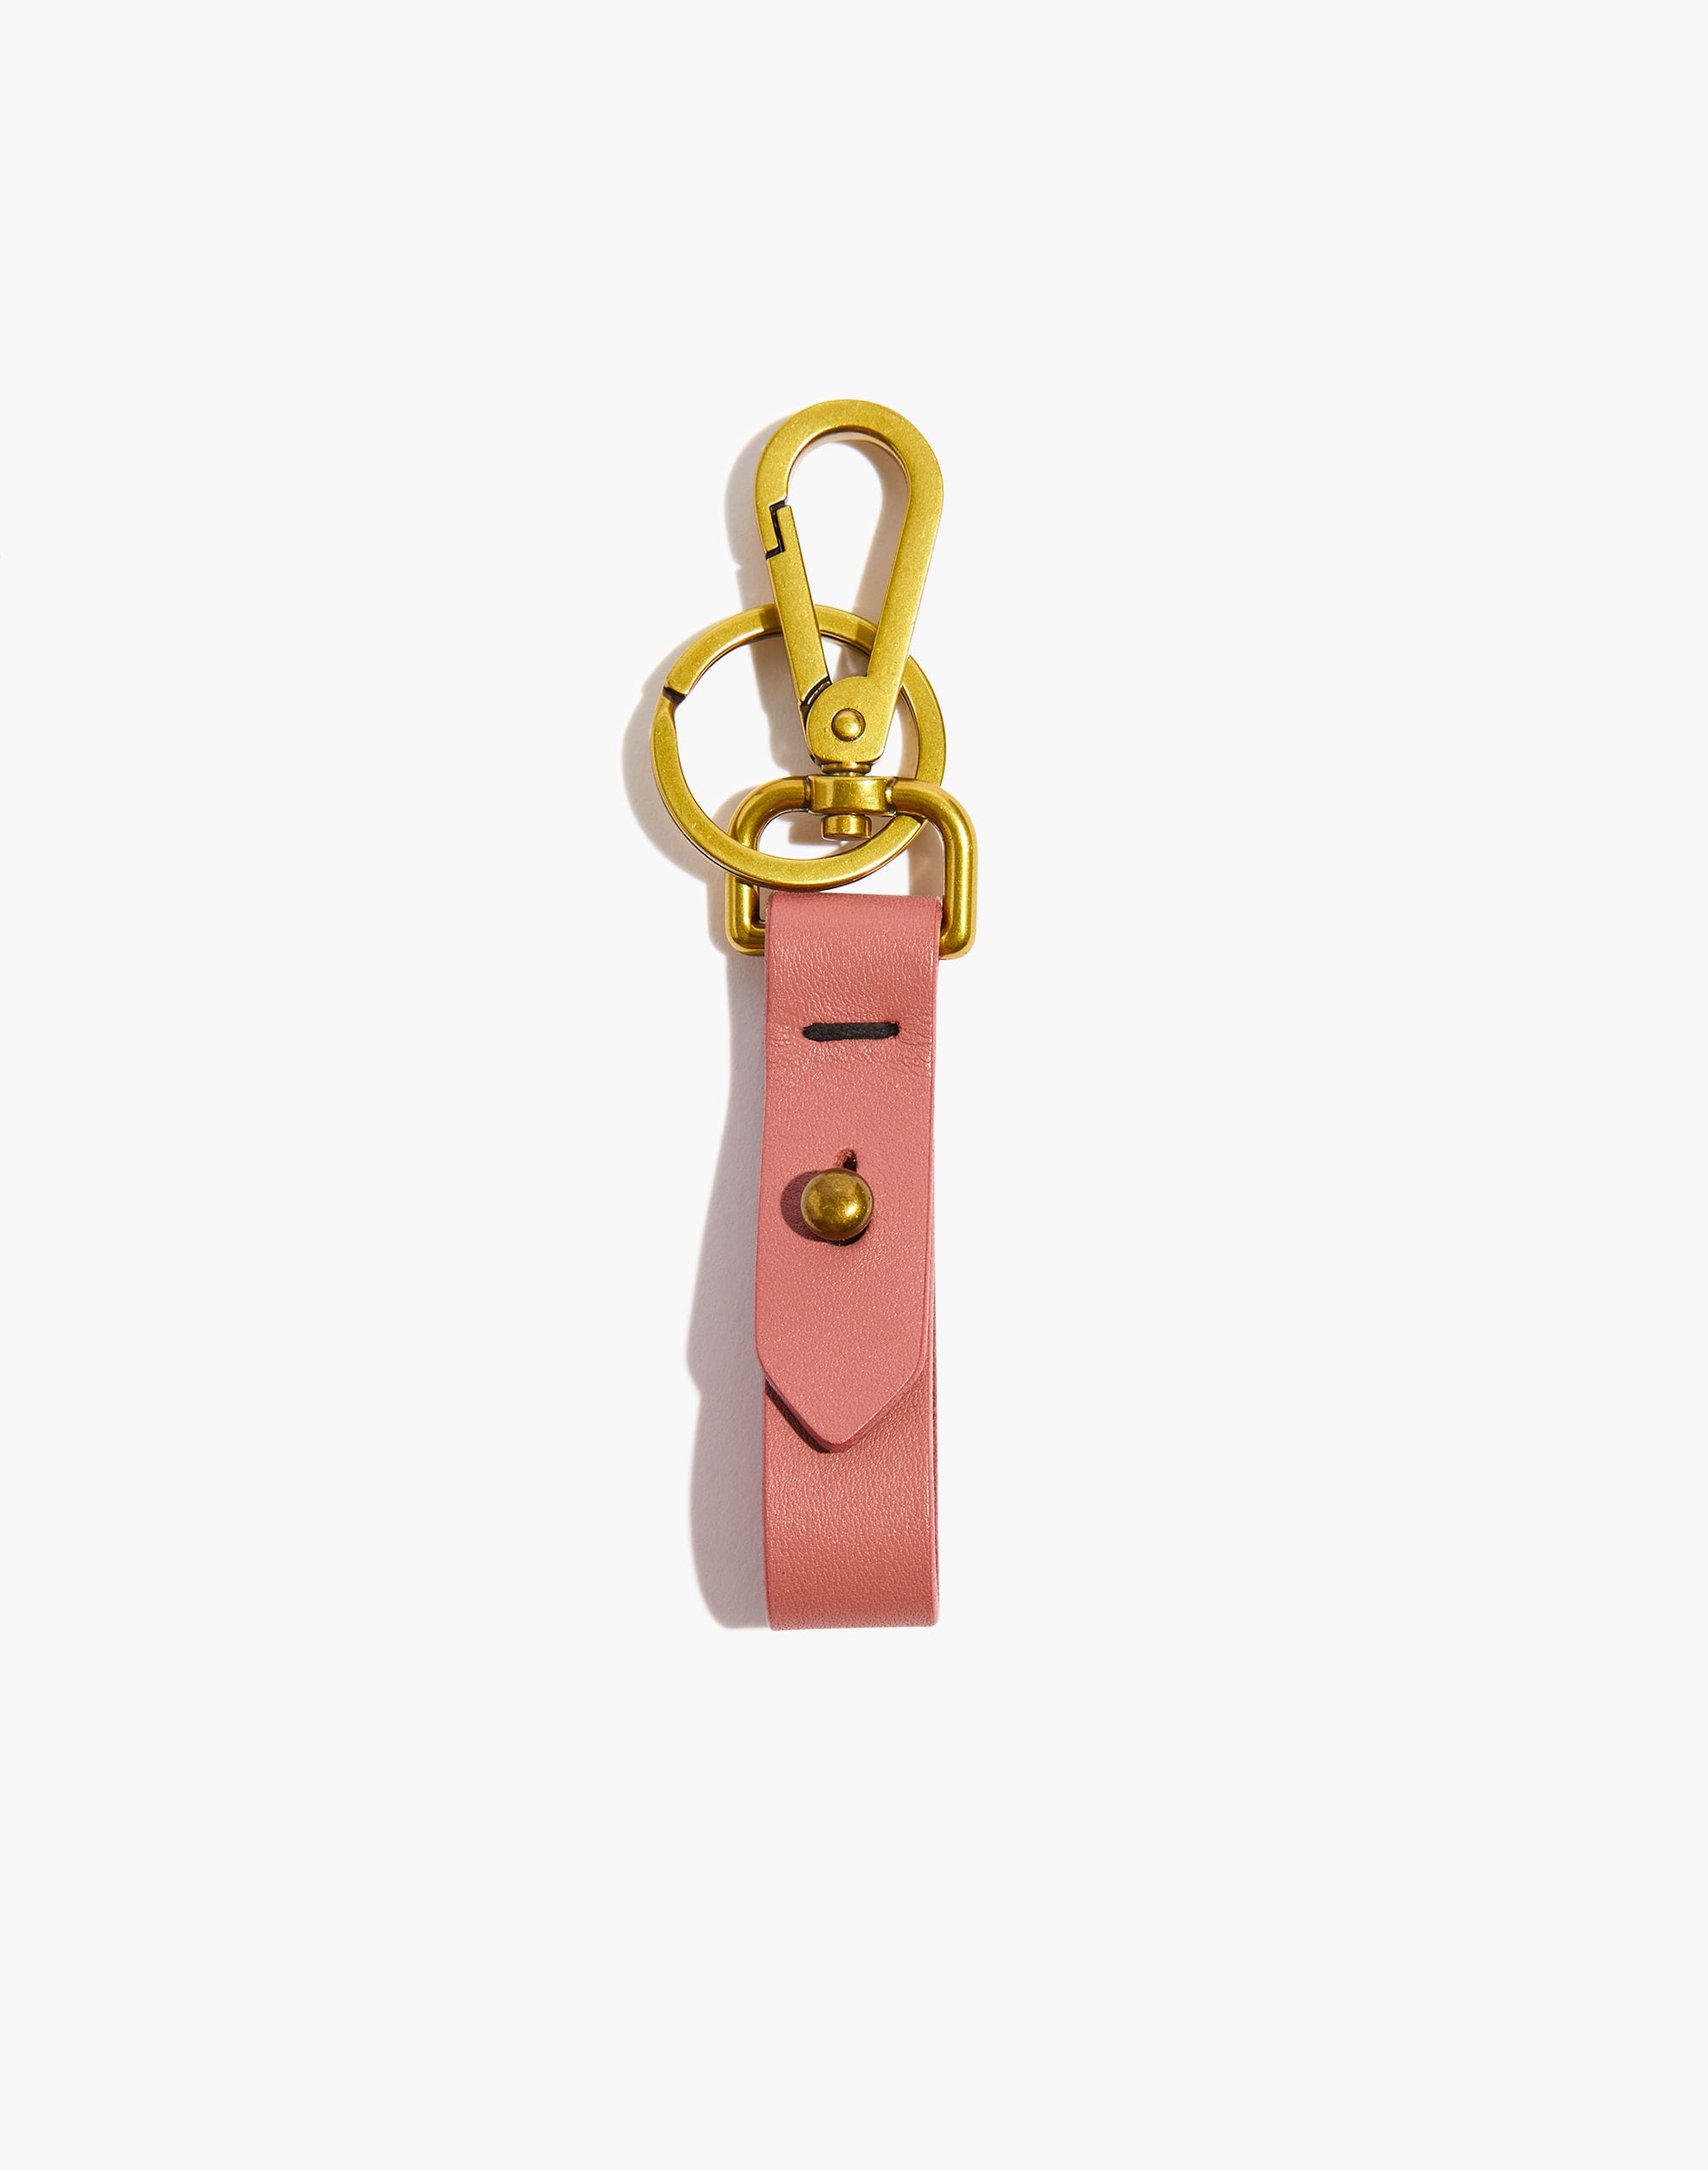 The Front Door Key Fob in Leather